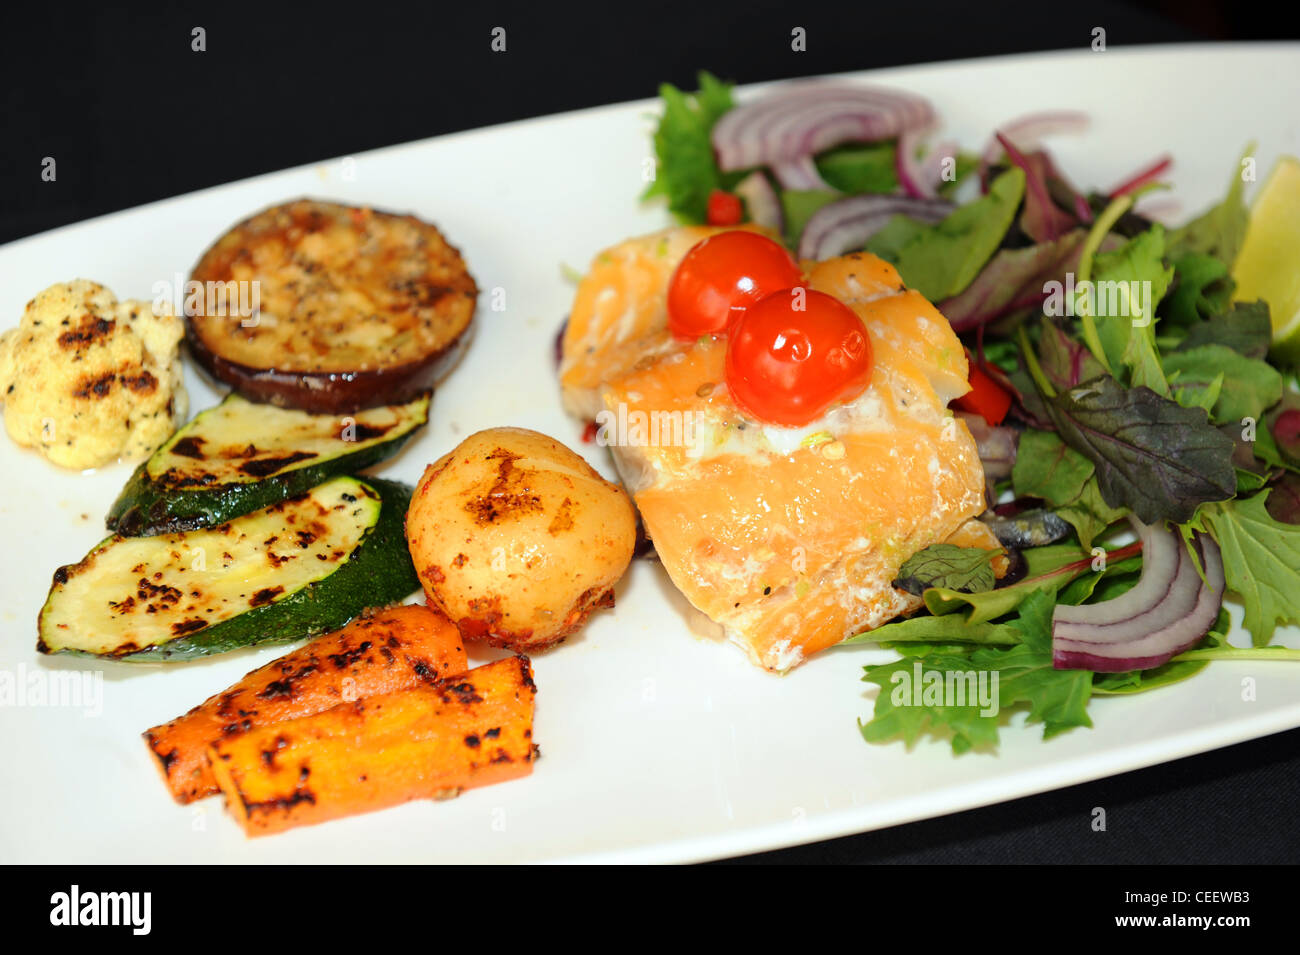 Grilled fish, vegetables and salad Stock Photo